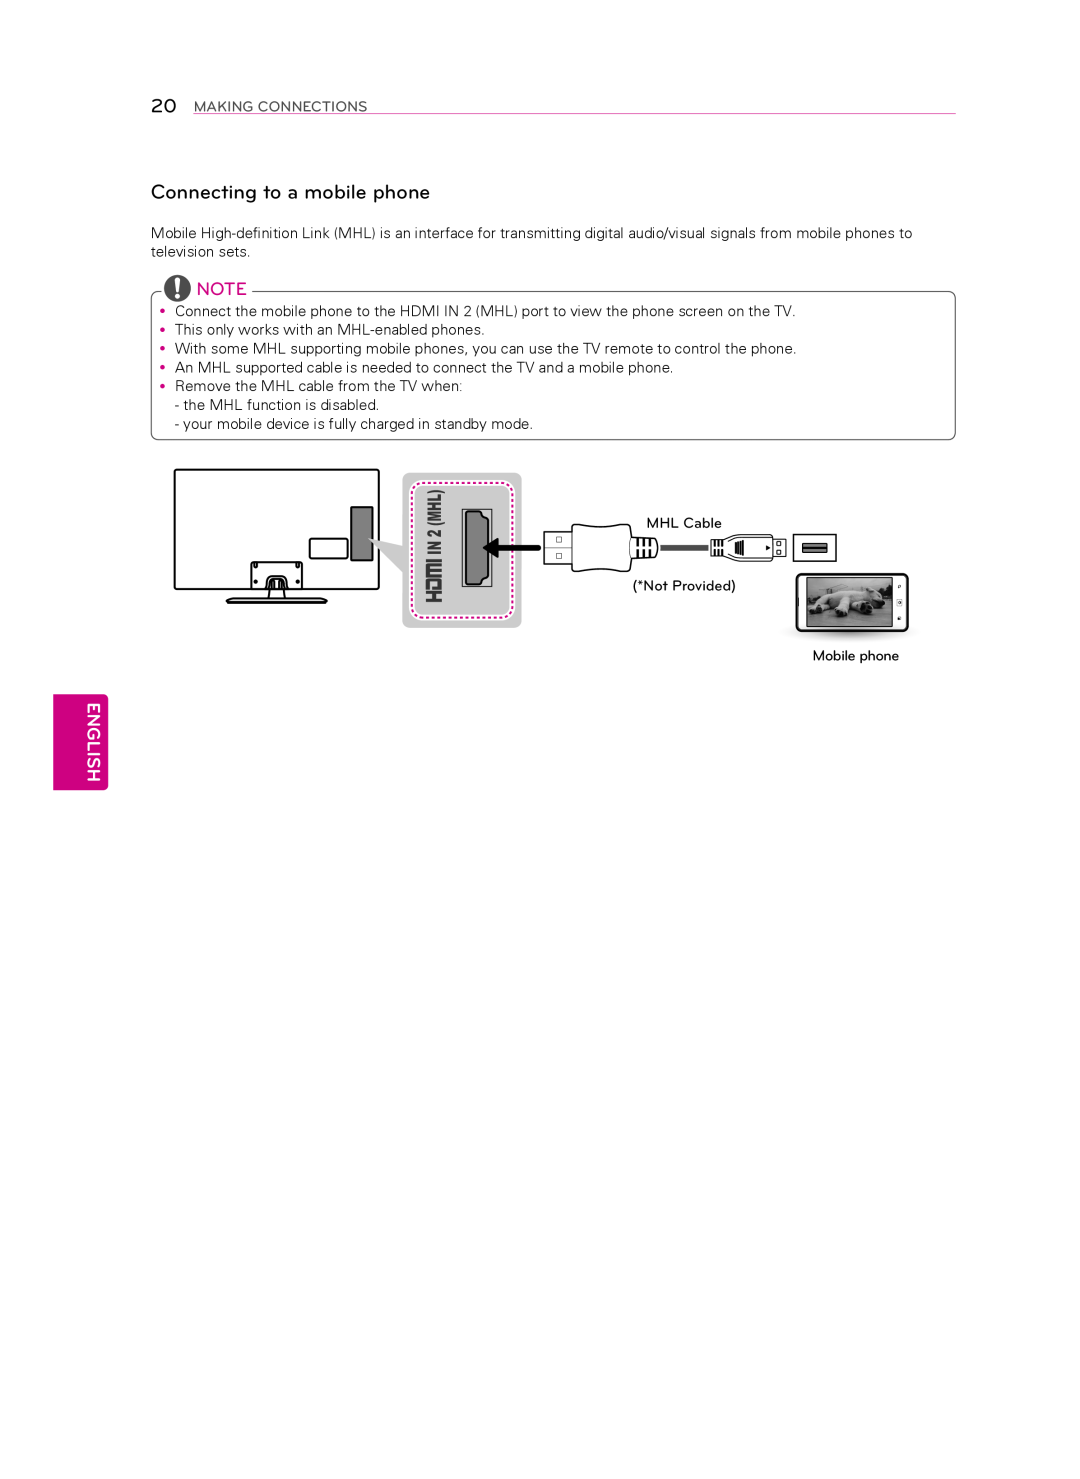 LG Electronics 60LN5400 owner manual Connecting to a mobile phone, English, Making Connections 